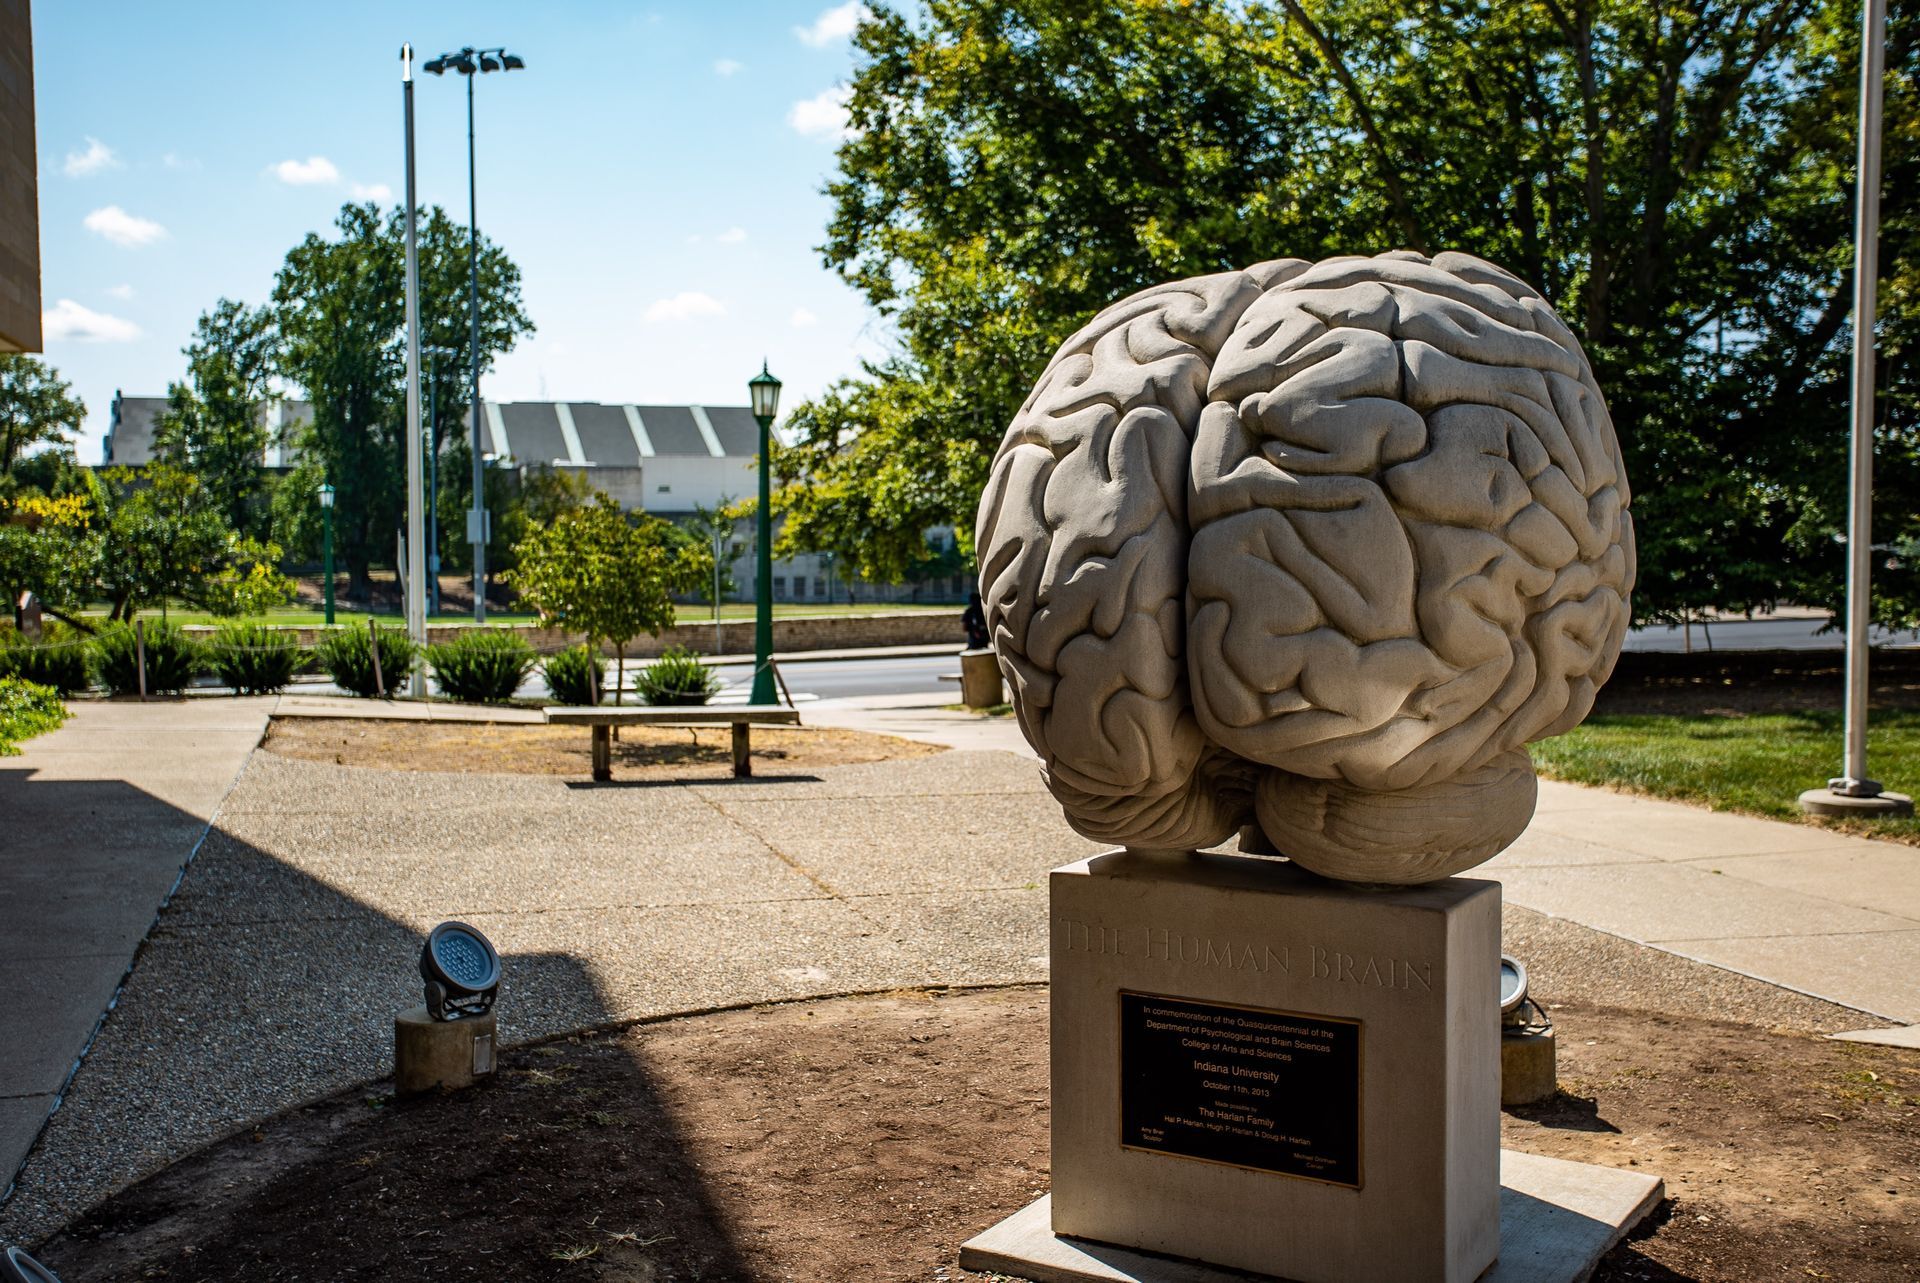 
World's largest anatomically-accurate brain sculpture: Bloomington, Indiana